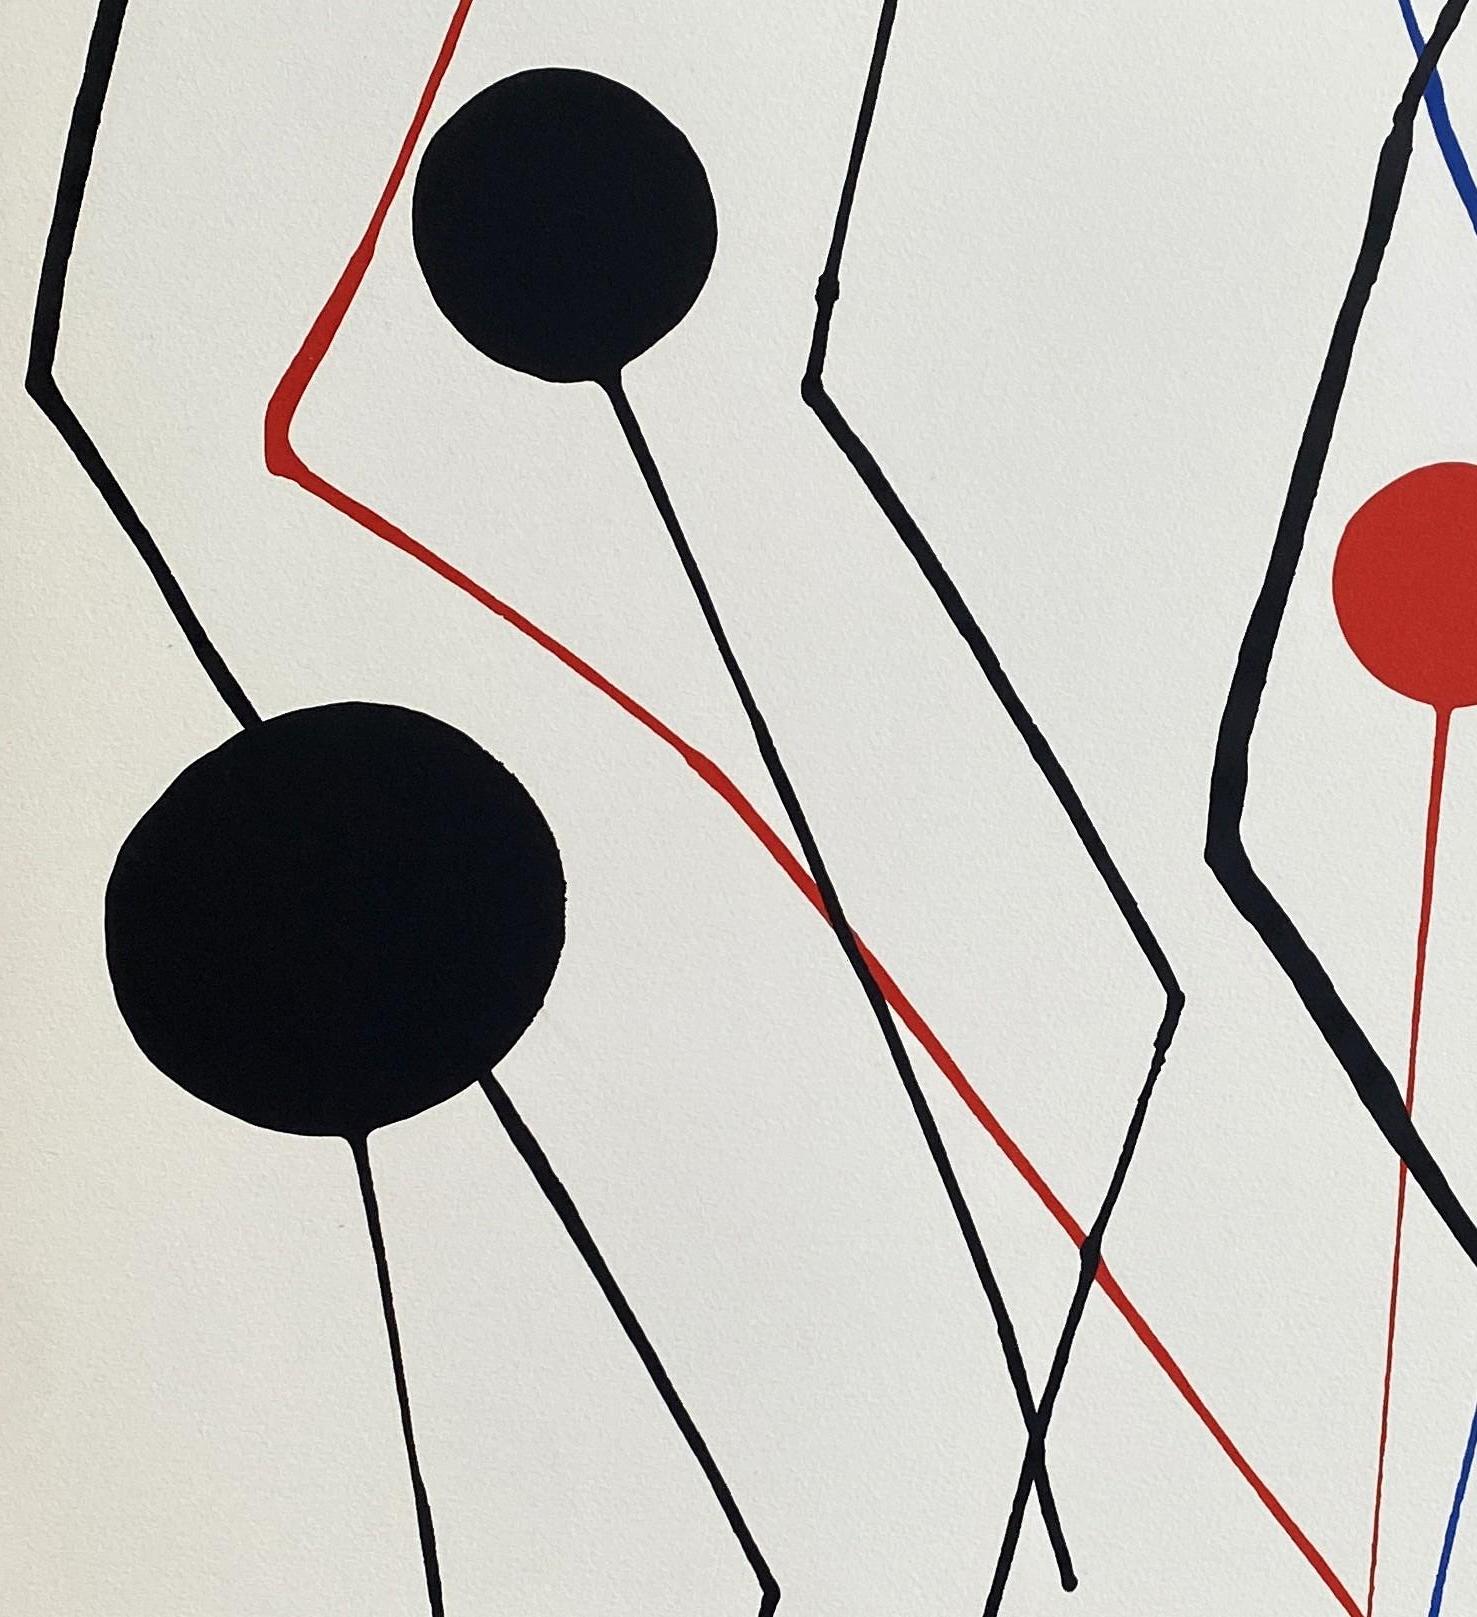 Alexander CALDER
Red, blue and black balloons

Original lithograph, 1973
Signed in the plate
On Arches vellum size 78 x 59 cm (c. 29 x 23 in)
Very good condition